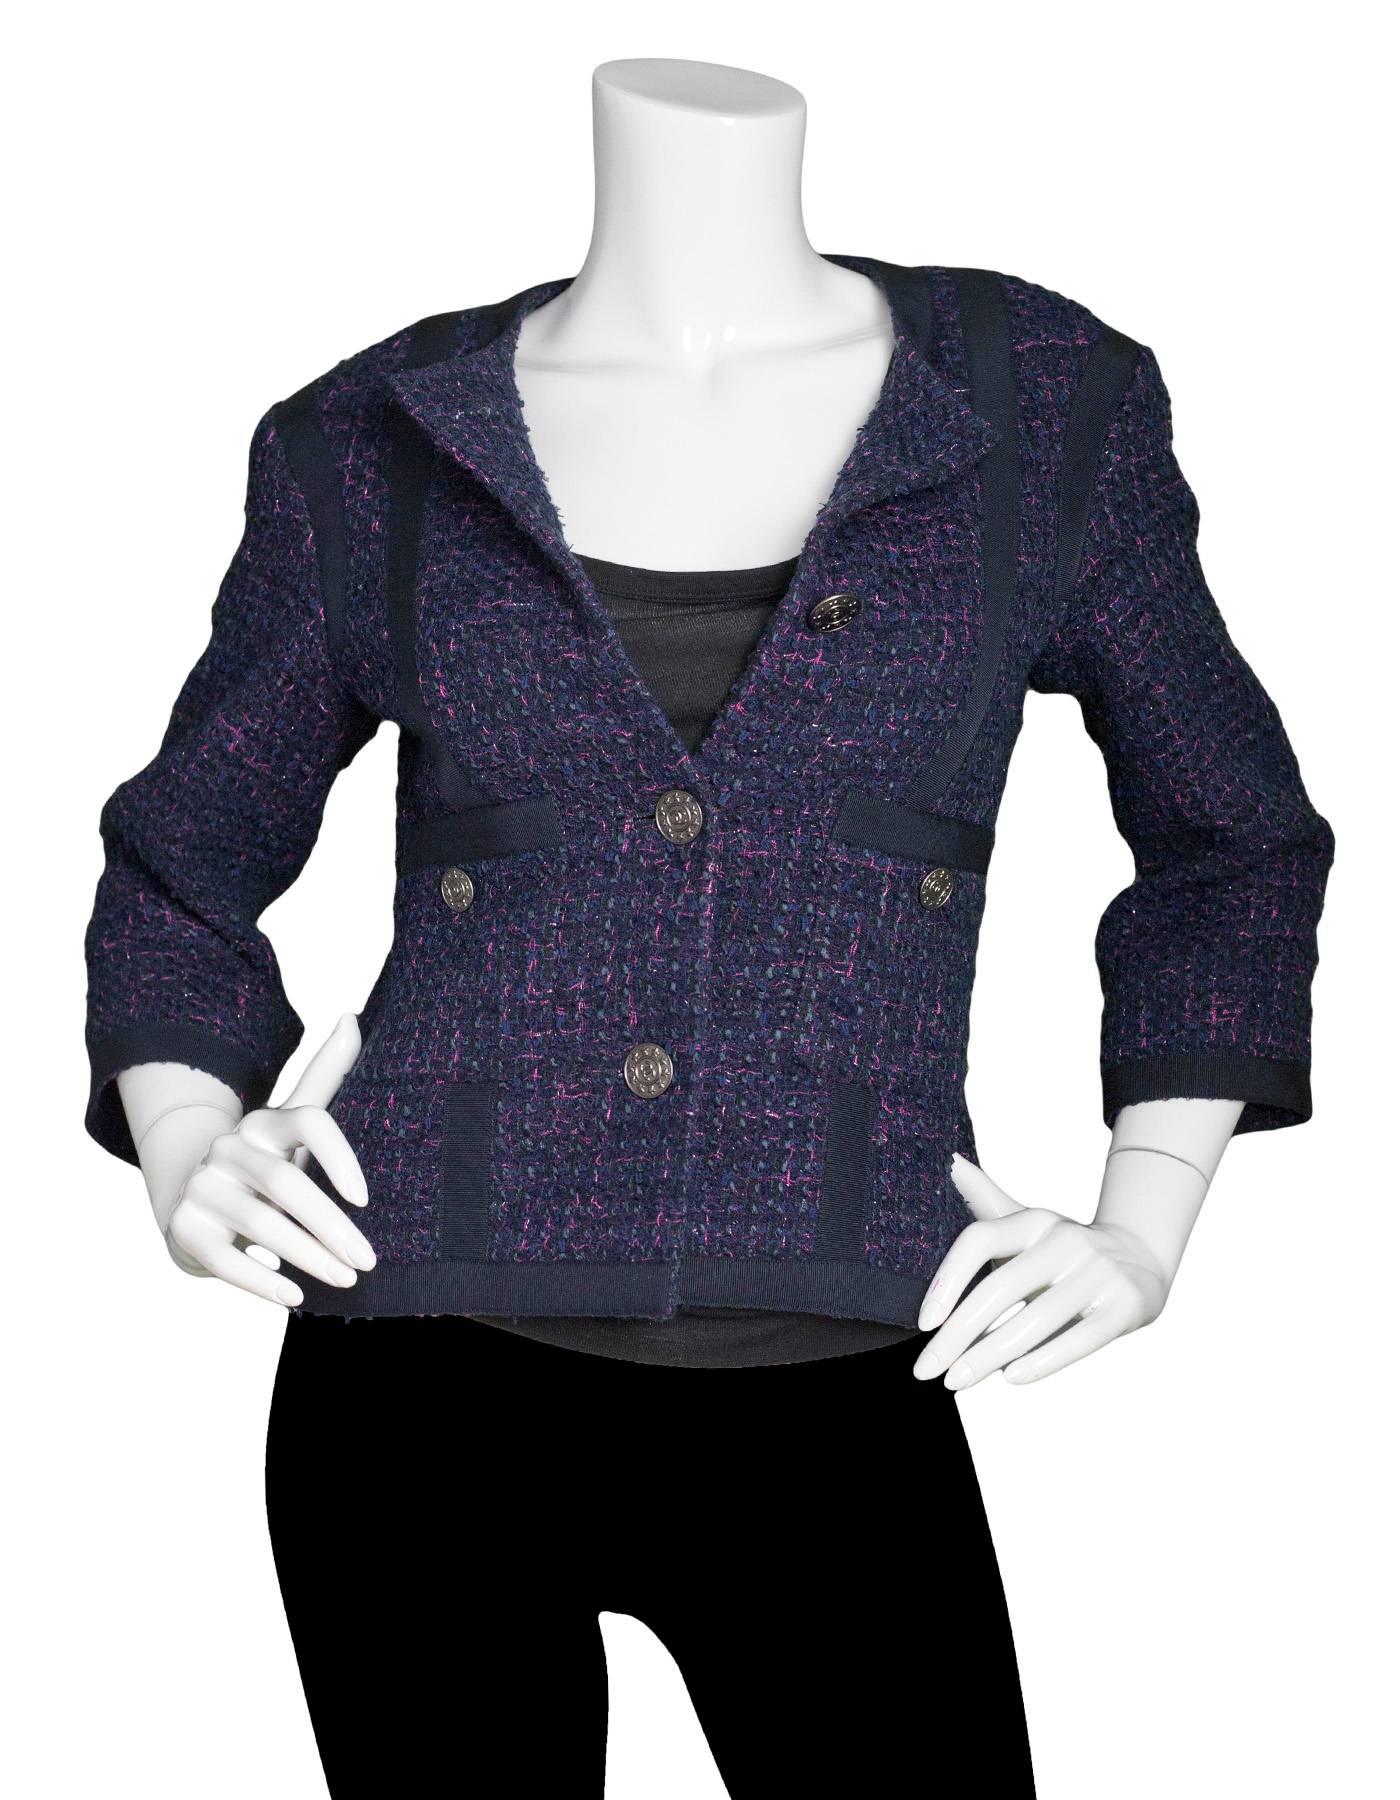 Chanel Navy & Pink Tweed Jacket with Grossgrain Trim Sz FR36

Features star CC buttons

Made In: France
Color: Black, pink, navy
Composition: 41% Nylon, 41% Cotton, 10% Acrylic, 3% Wool, 3% Rayon, 2% Polyester
Lining: NAvy 100% Silk
Closure/Opening: